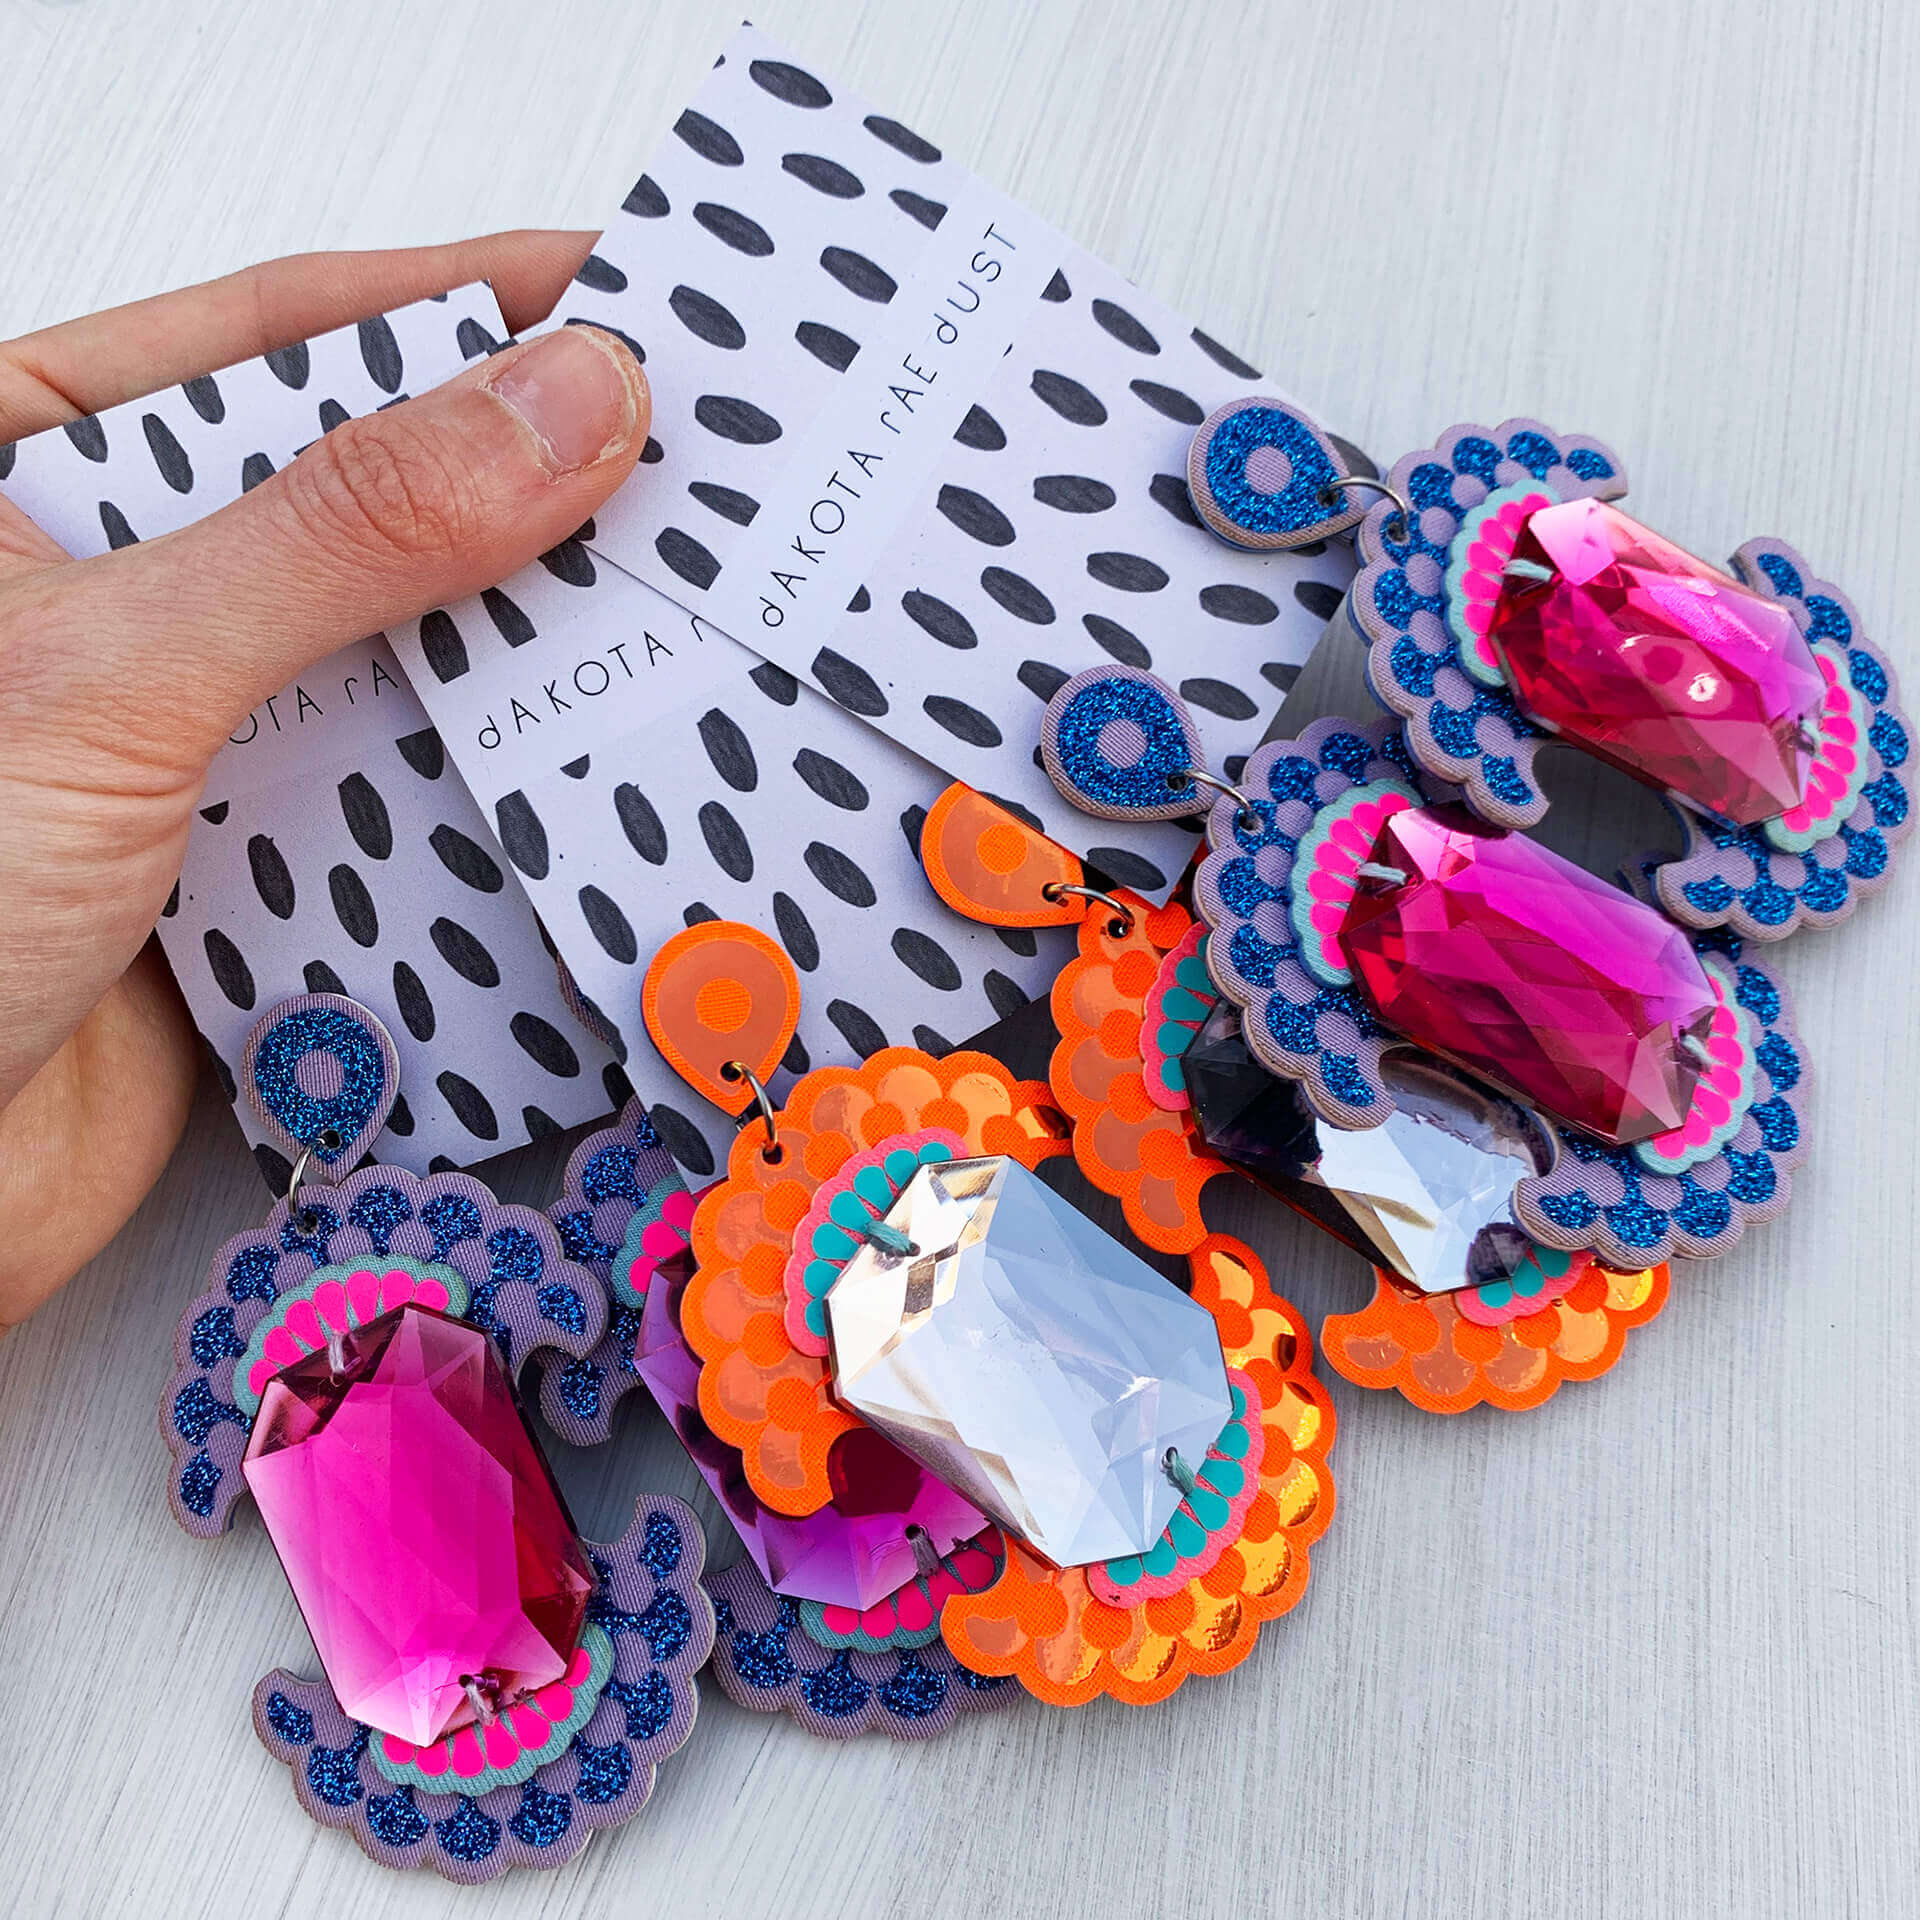 Three pairs over colourful, oversize earrings adorned with giant jewels mounted on black and white patterned, dakota rae dust branded cards are held in a woman's hand